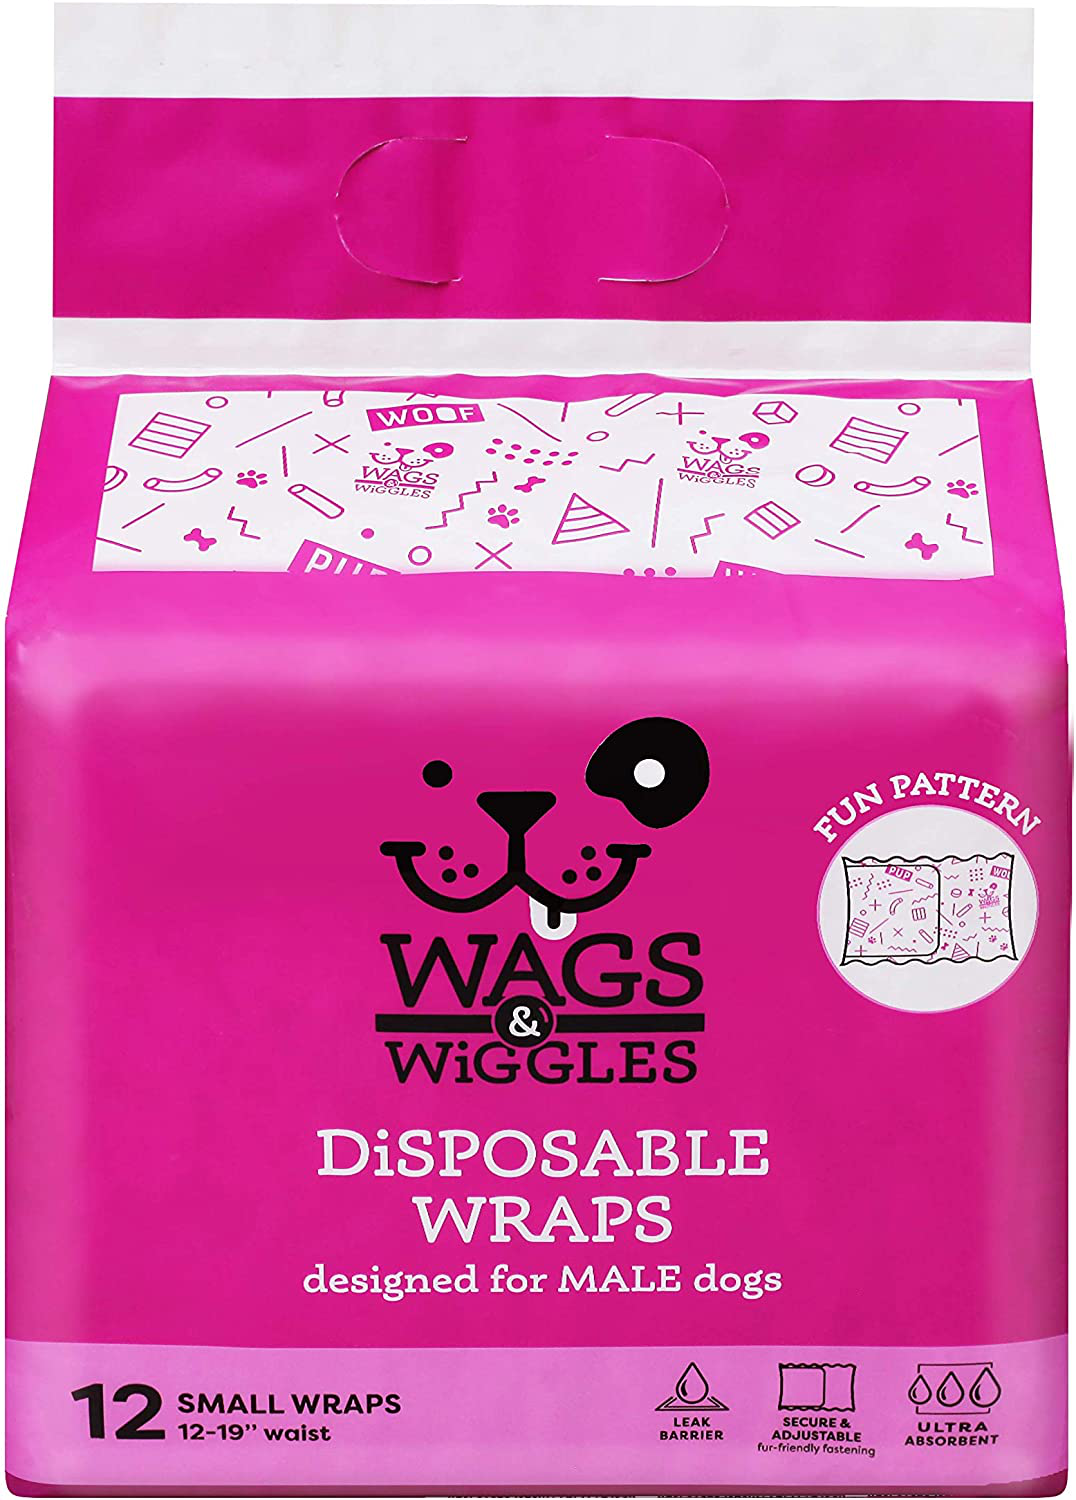 Wags & Wiggles Dog Diapers - Doggie Diapers for Female Dogs and Male Dogs-Doggy Diapers from Wags and Wiggles-Disposable Dog Diapers for All Sized Dogs, Diapers for Pets, Dog Wraps Animals & Pet Supplies > Pet Supplies > Dog Supplies > Dog Diaper Pads & Liners Fetch for Pets Male Dog Wraps Small 